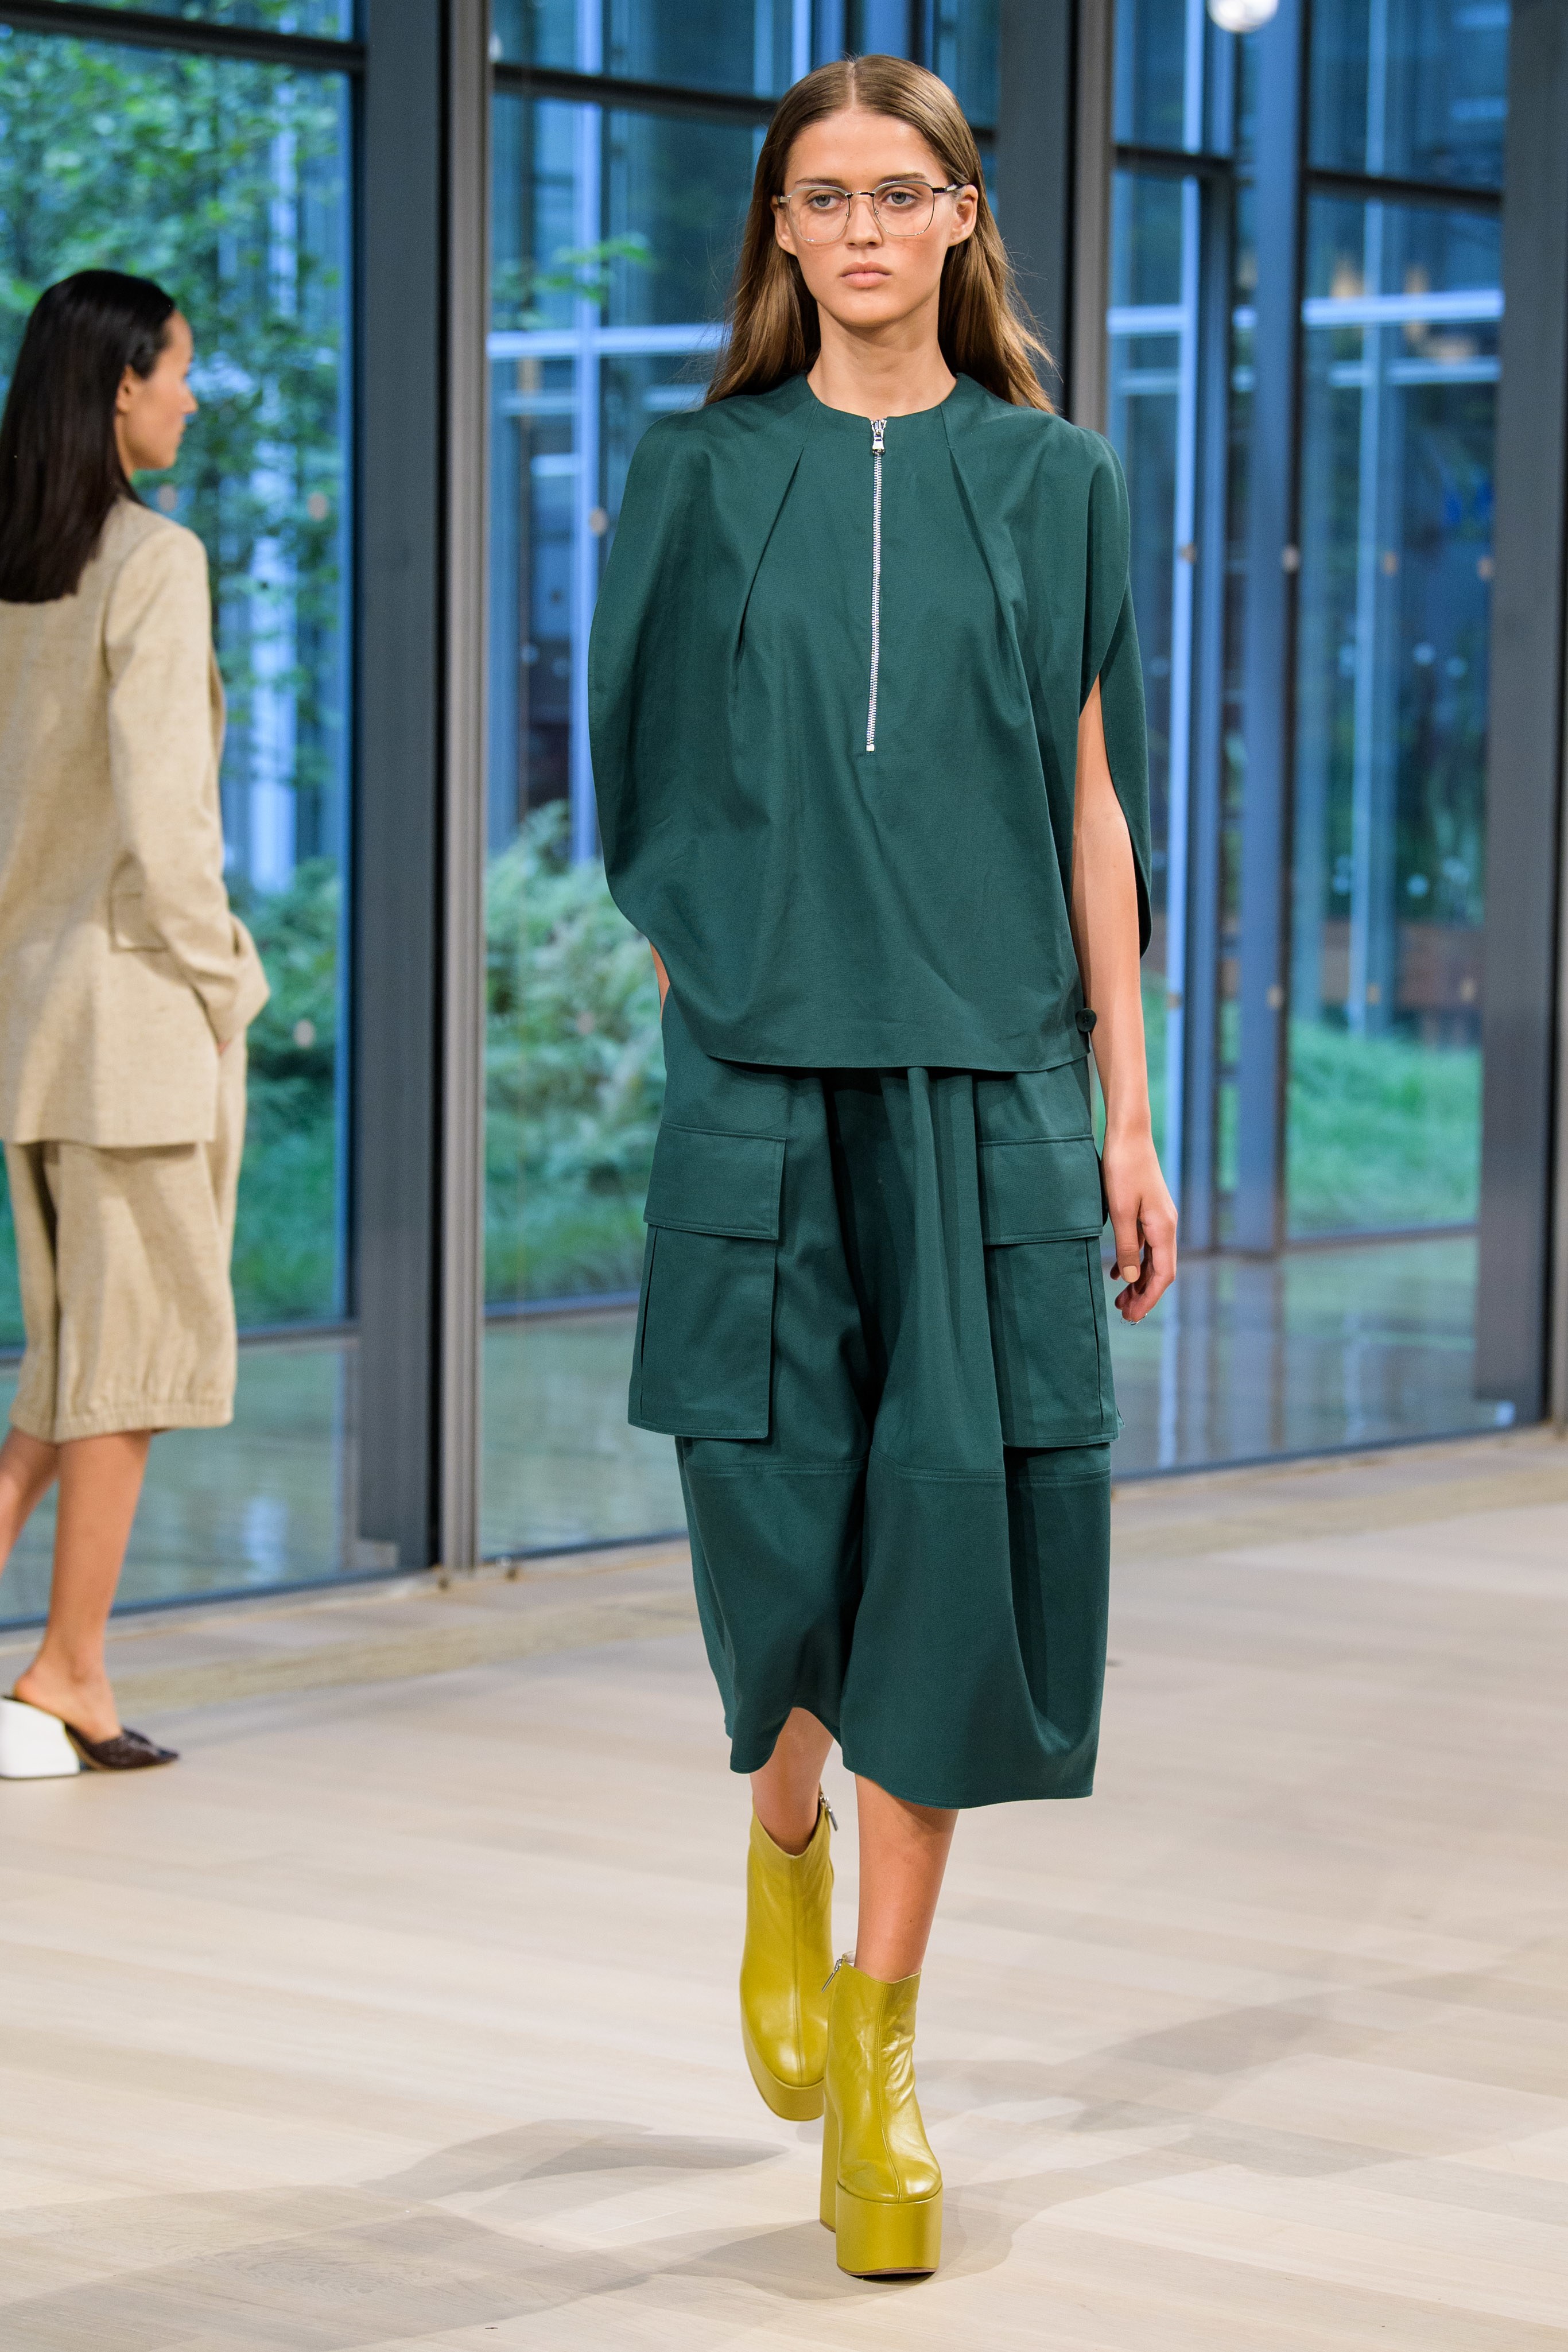 Tibi Spring Summer 2020 SS2020 trends runway coverage Ready To Wear Vogue monochrome